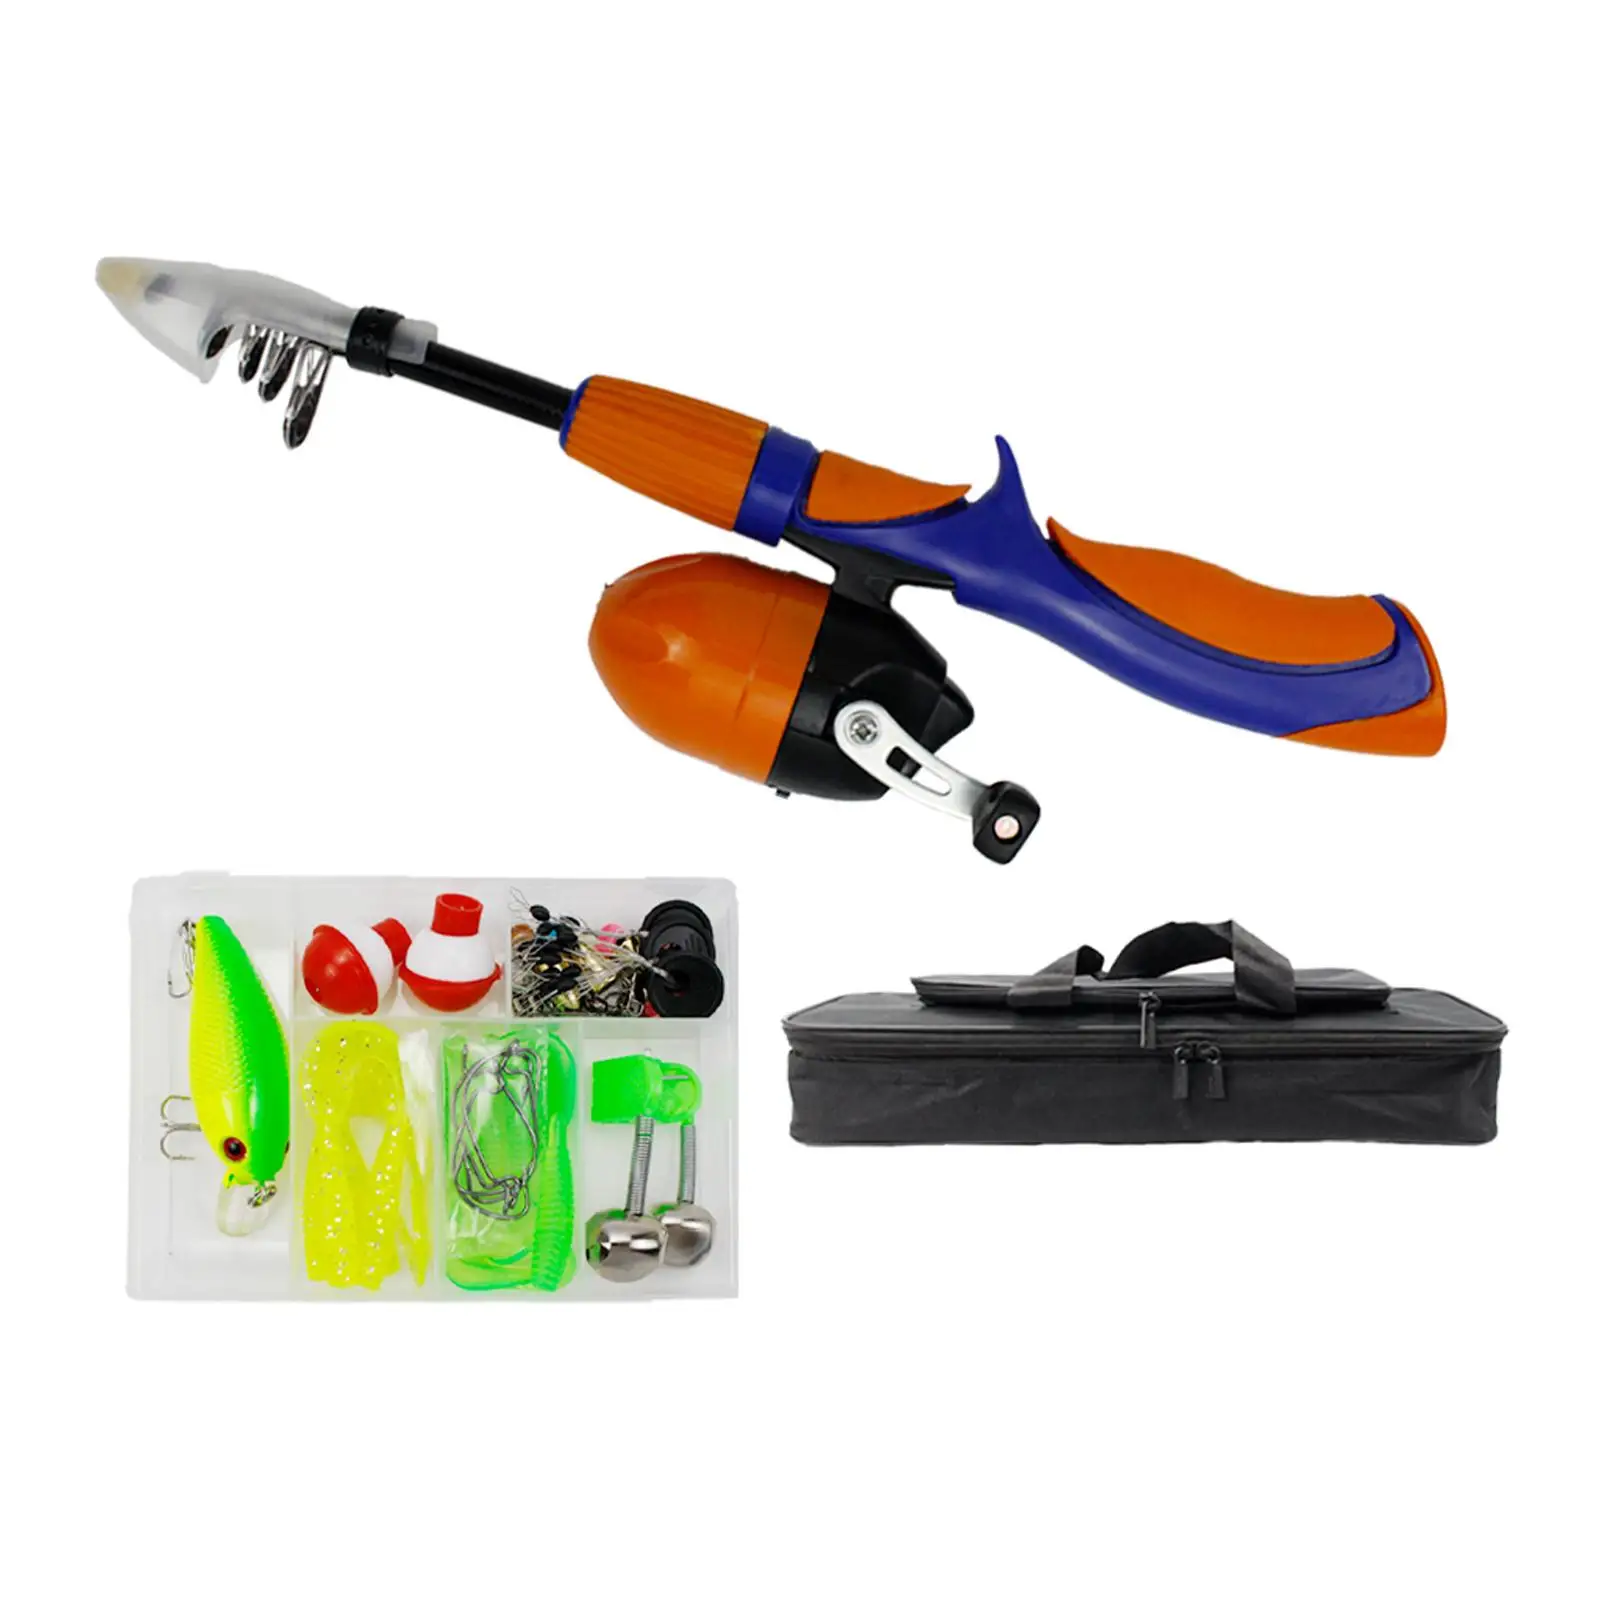 Fishing Pole Tackle Box Fishing Rod and Reel Combos Travel Tote with Fishing Line Fishing Gear Accessories for Beginner Children